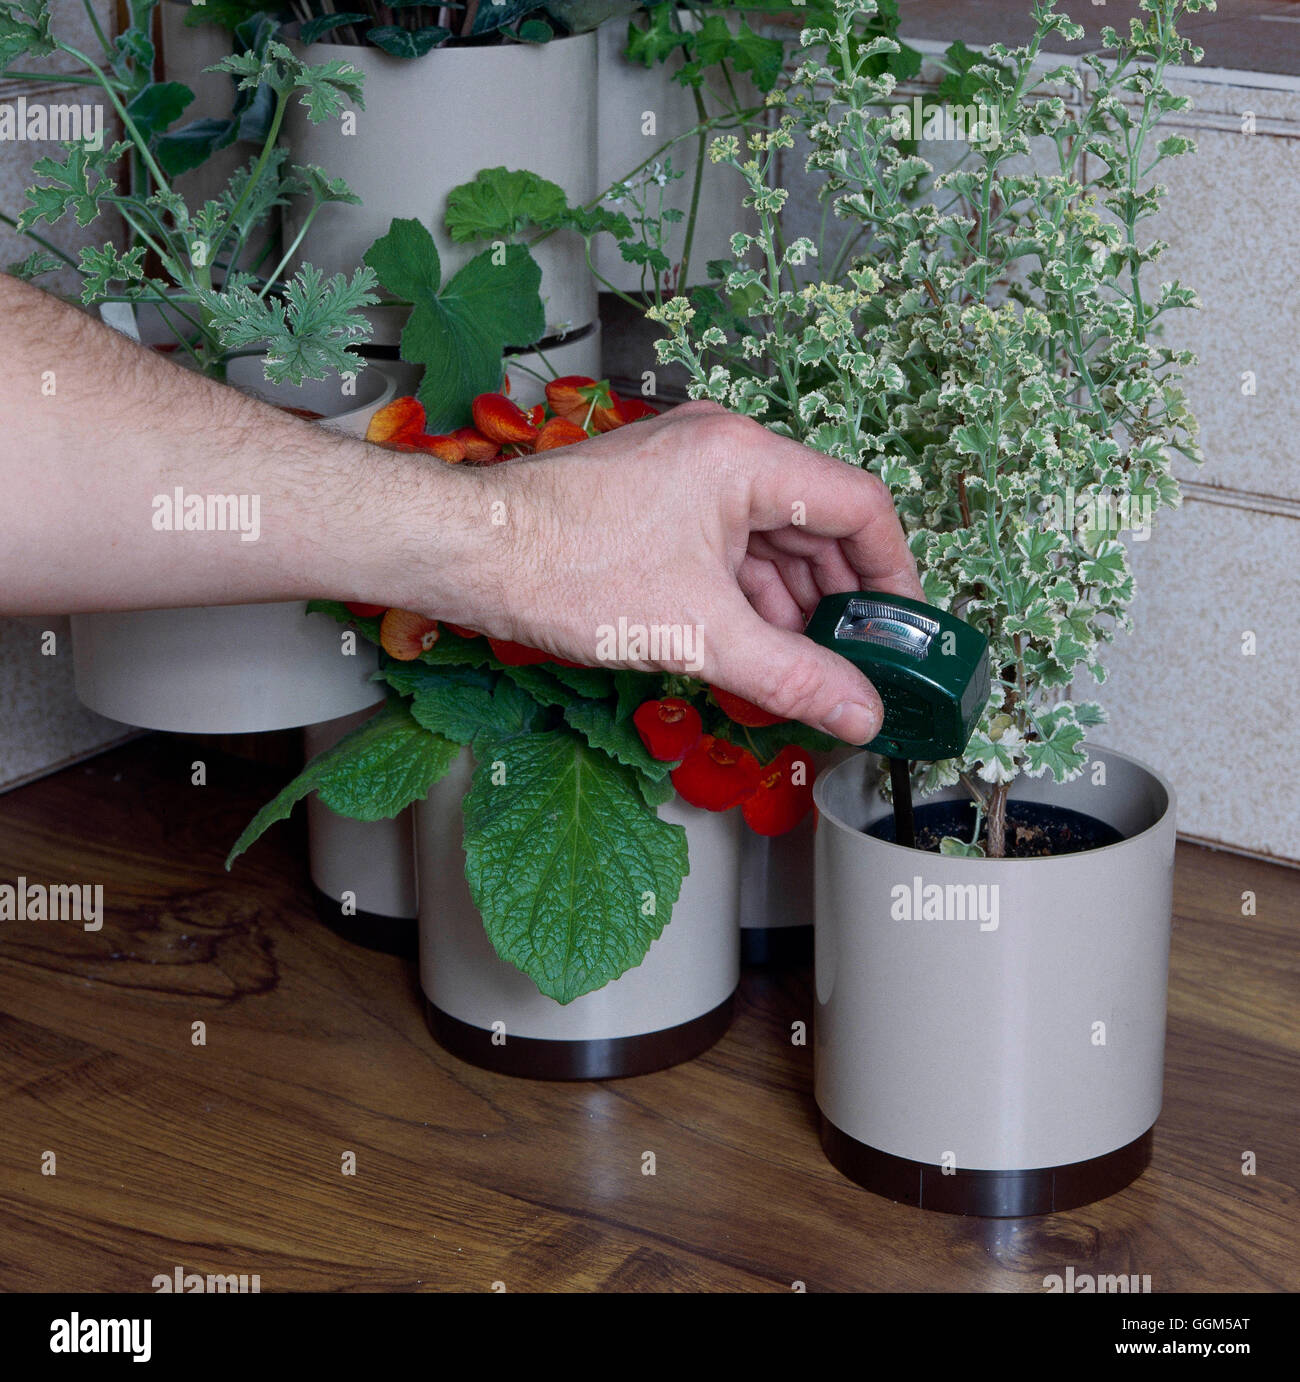 Houseplant Care: - Using a moisture meter so as not to over-water   TAS025236     Photos Horticultur Stock Photo